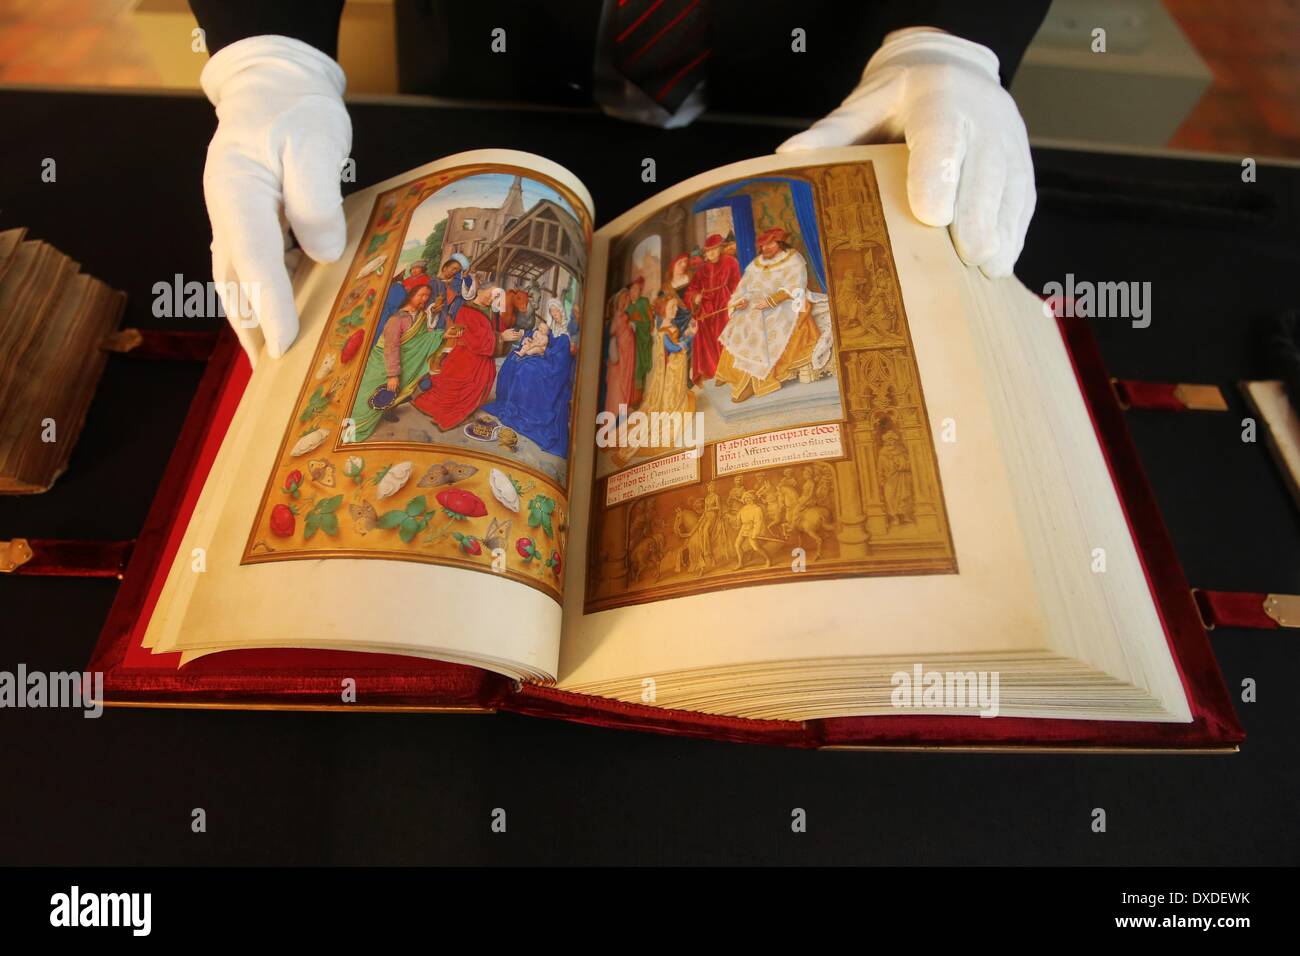 Mainz, Germany. 24th Mar, 2014. A man leafs through the pages of the facsimile of 'Brevarium Grimani' at the exhibition Princes of the Church, Art Patrons, Codices at Martinus Library in Mainz, Germany, 24 March 2014. The exhibition runs from 25 March till 25 April and will exhibit true to the original copies of the so-called 'Brevarium Grimani', which is cosidered a masterpiece of the Ghent-Bruges school of book painting and which was the prayer book of Albert of Mainz. Photo: FREDRIK VON ERICHSEN/DPA/Alamy Live News Stock Photo